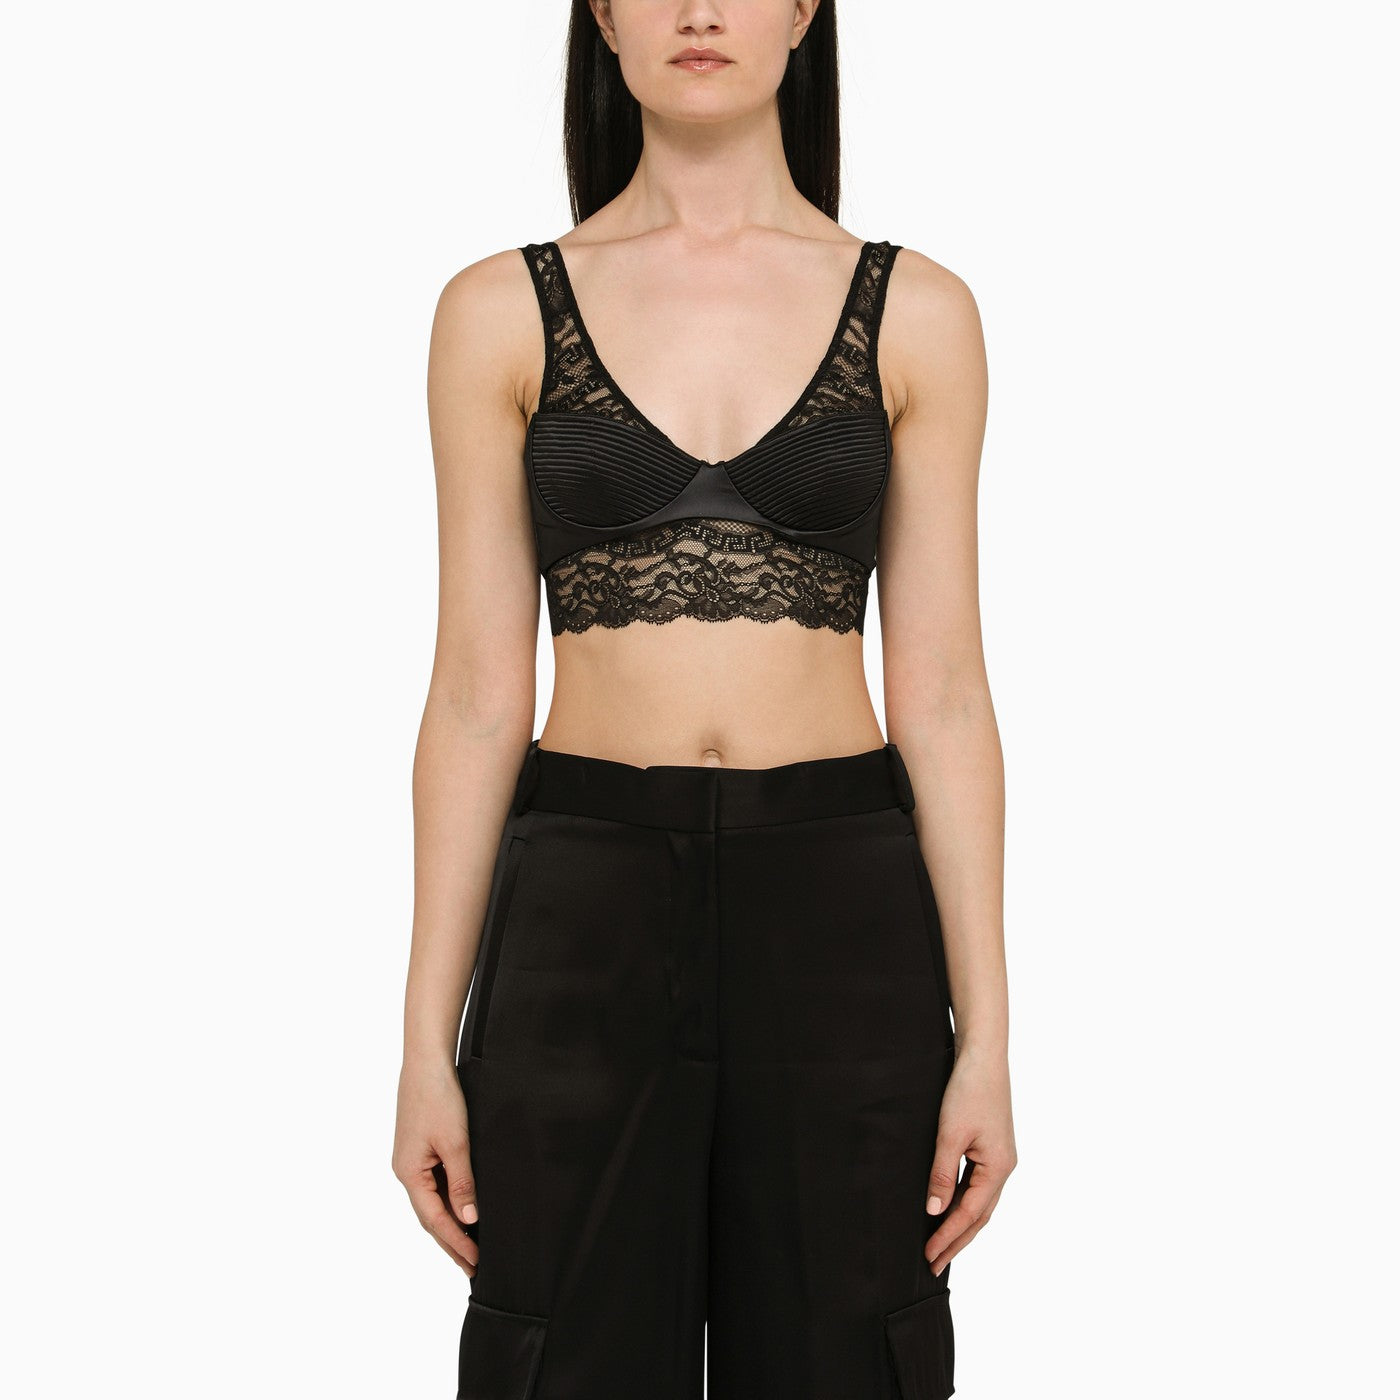 Versace Black Bra With Lace